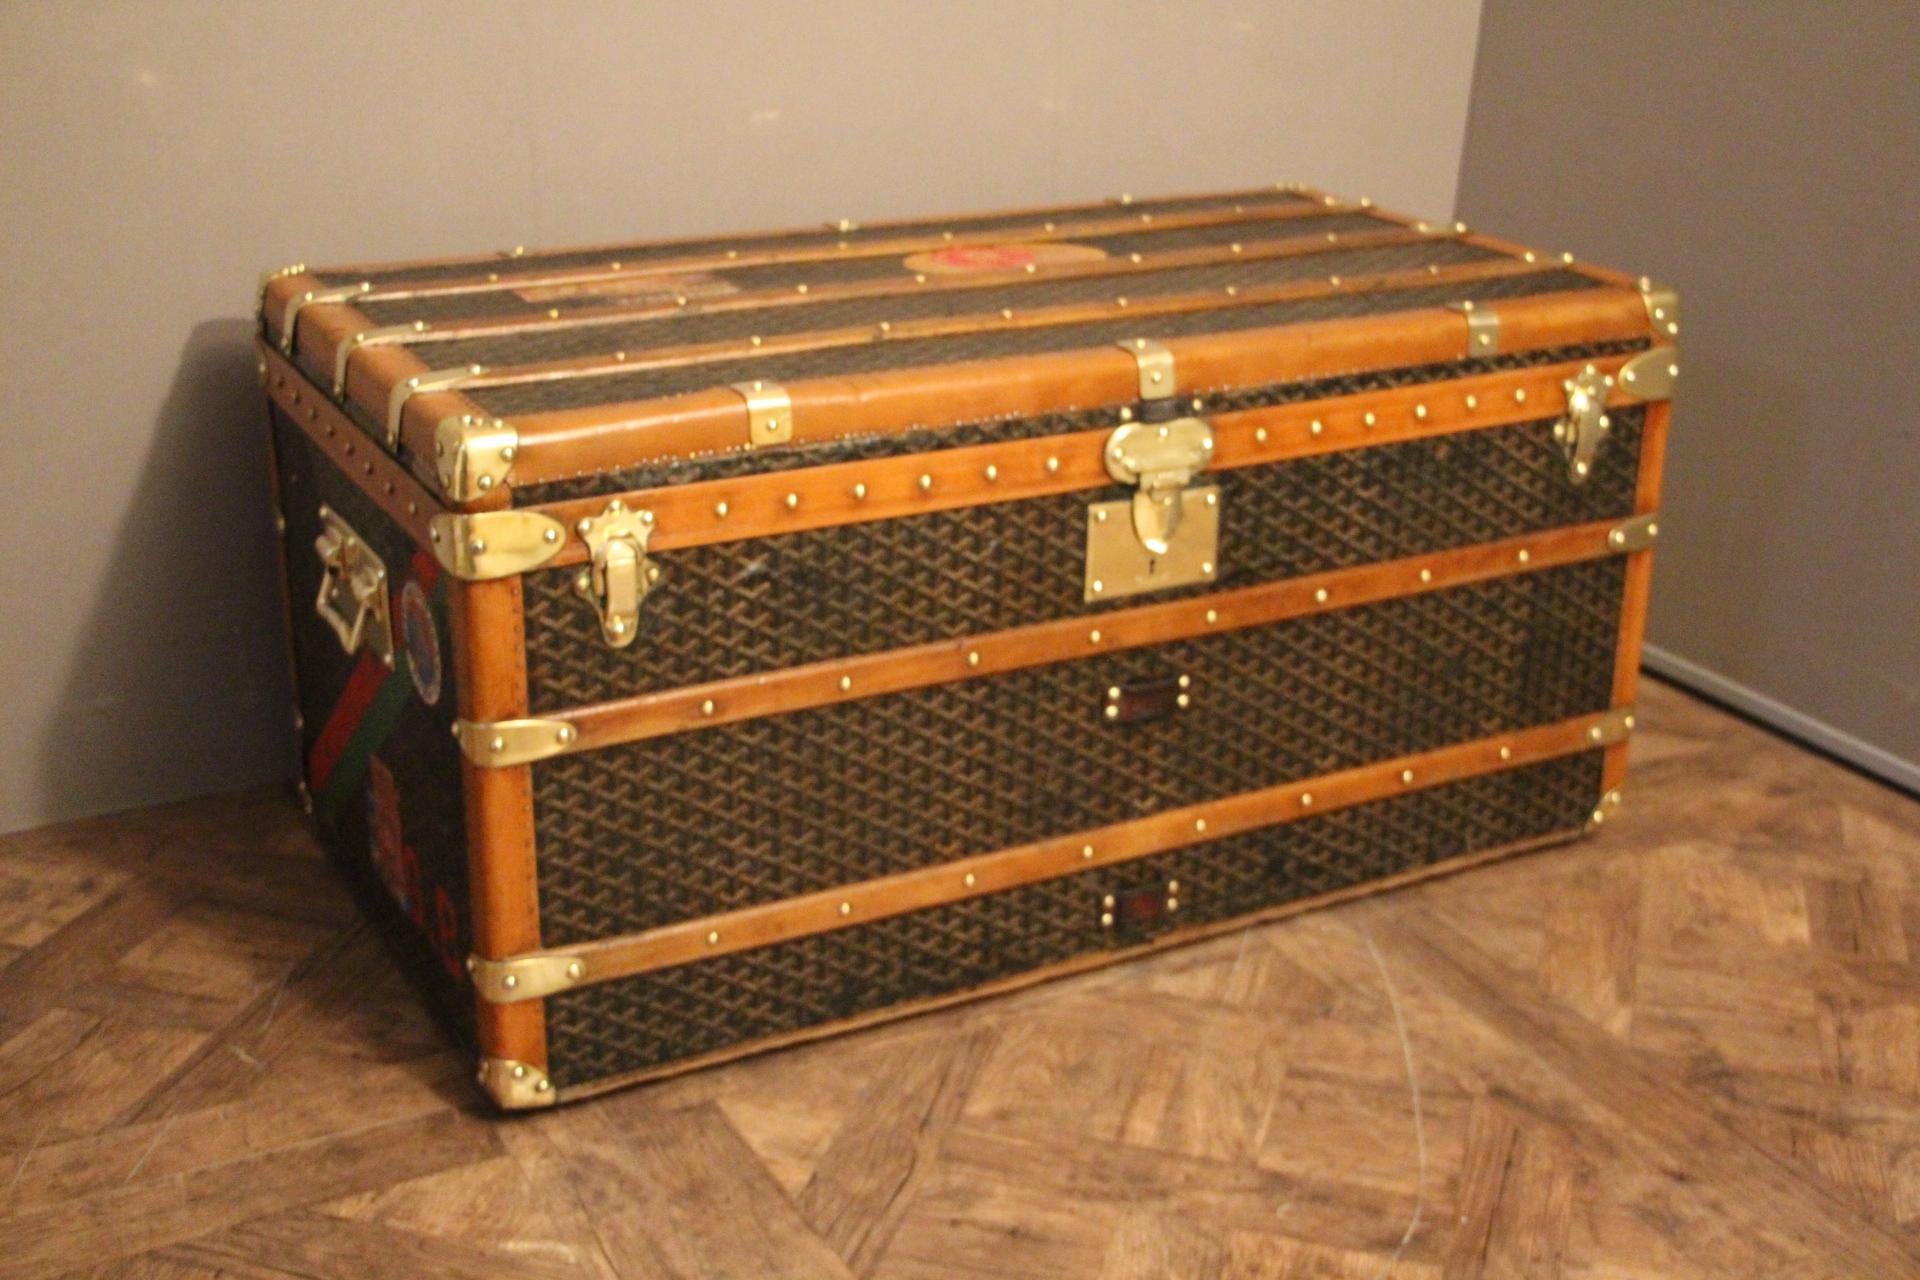 This Aine Goyard trunk has got very nice proportions as well as a beautiful, warm patina.
It features its famous and sought after chevron canvas, its original brass stamped lock, brass stamped clasps and brass stamped handles.Please note the the